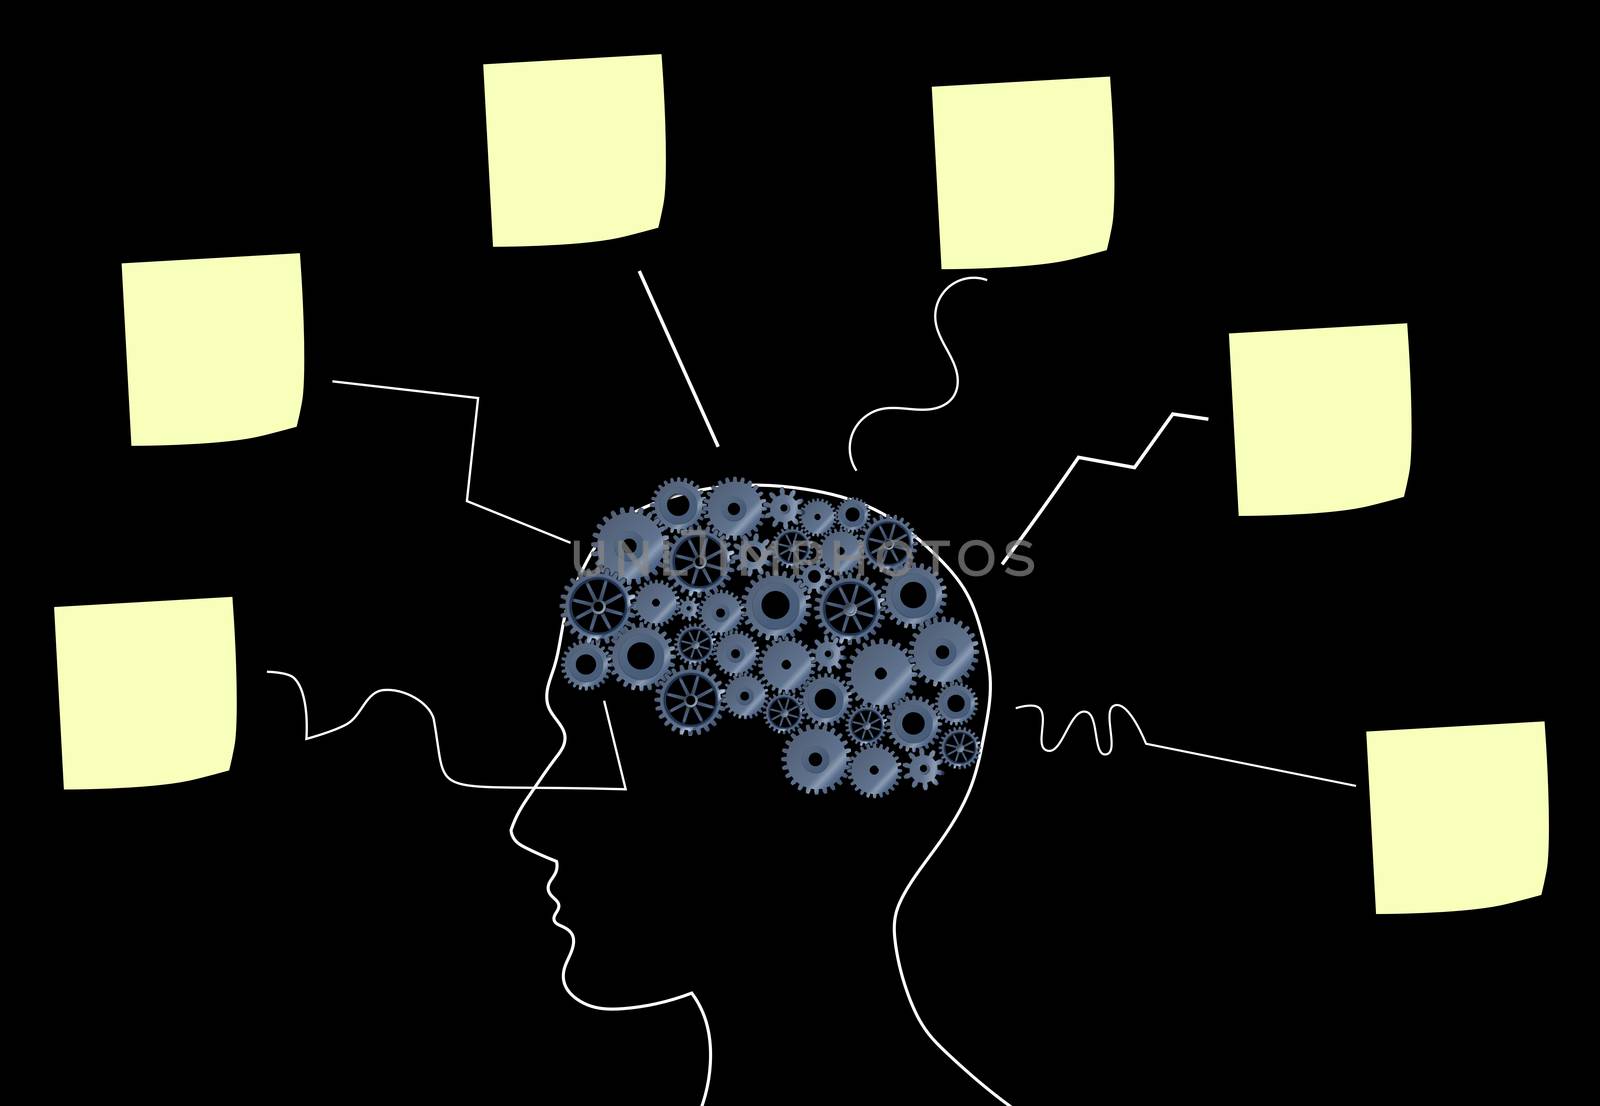 Illustration of a brain with many ideas on paper notes on a black background